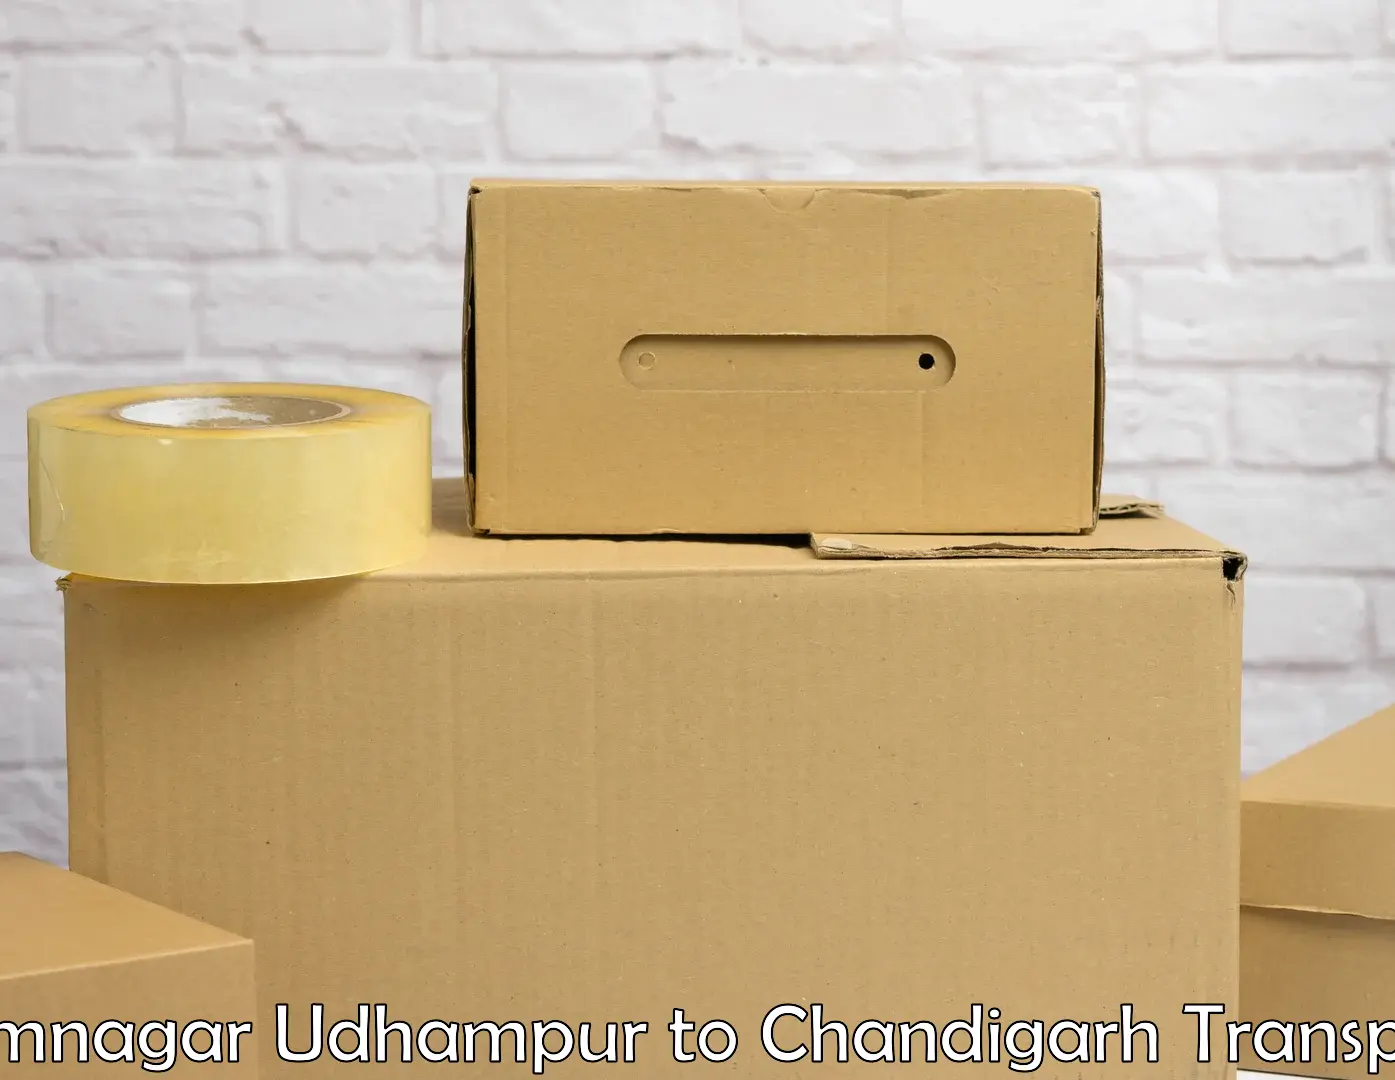 Vehicle courier services in Ramnagar Udhampur to Chandigarh